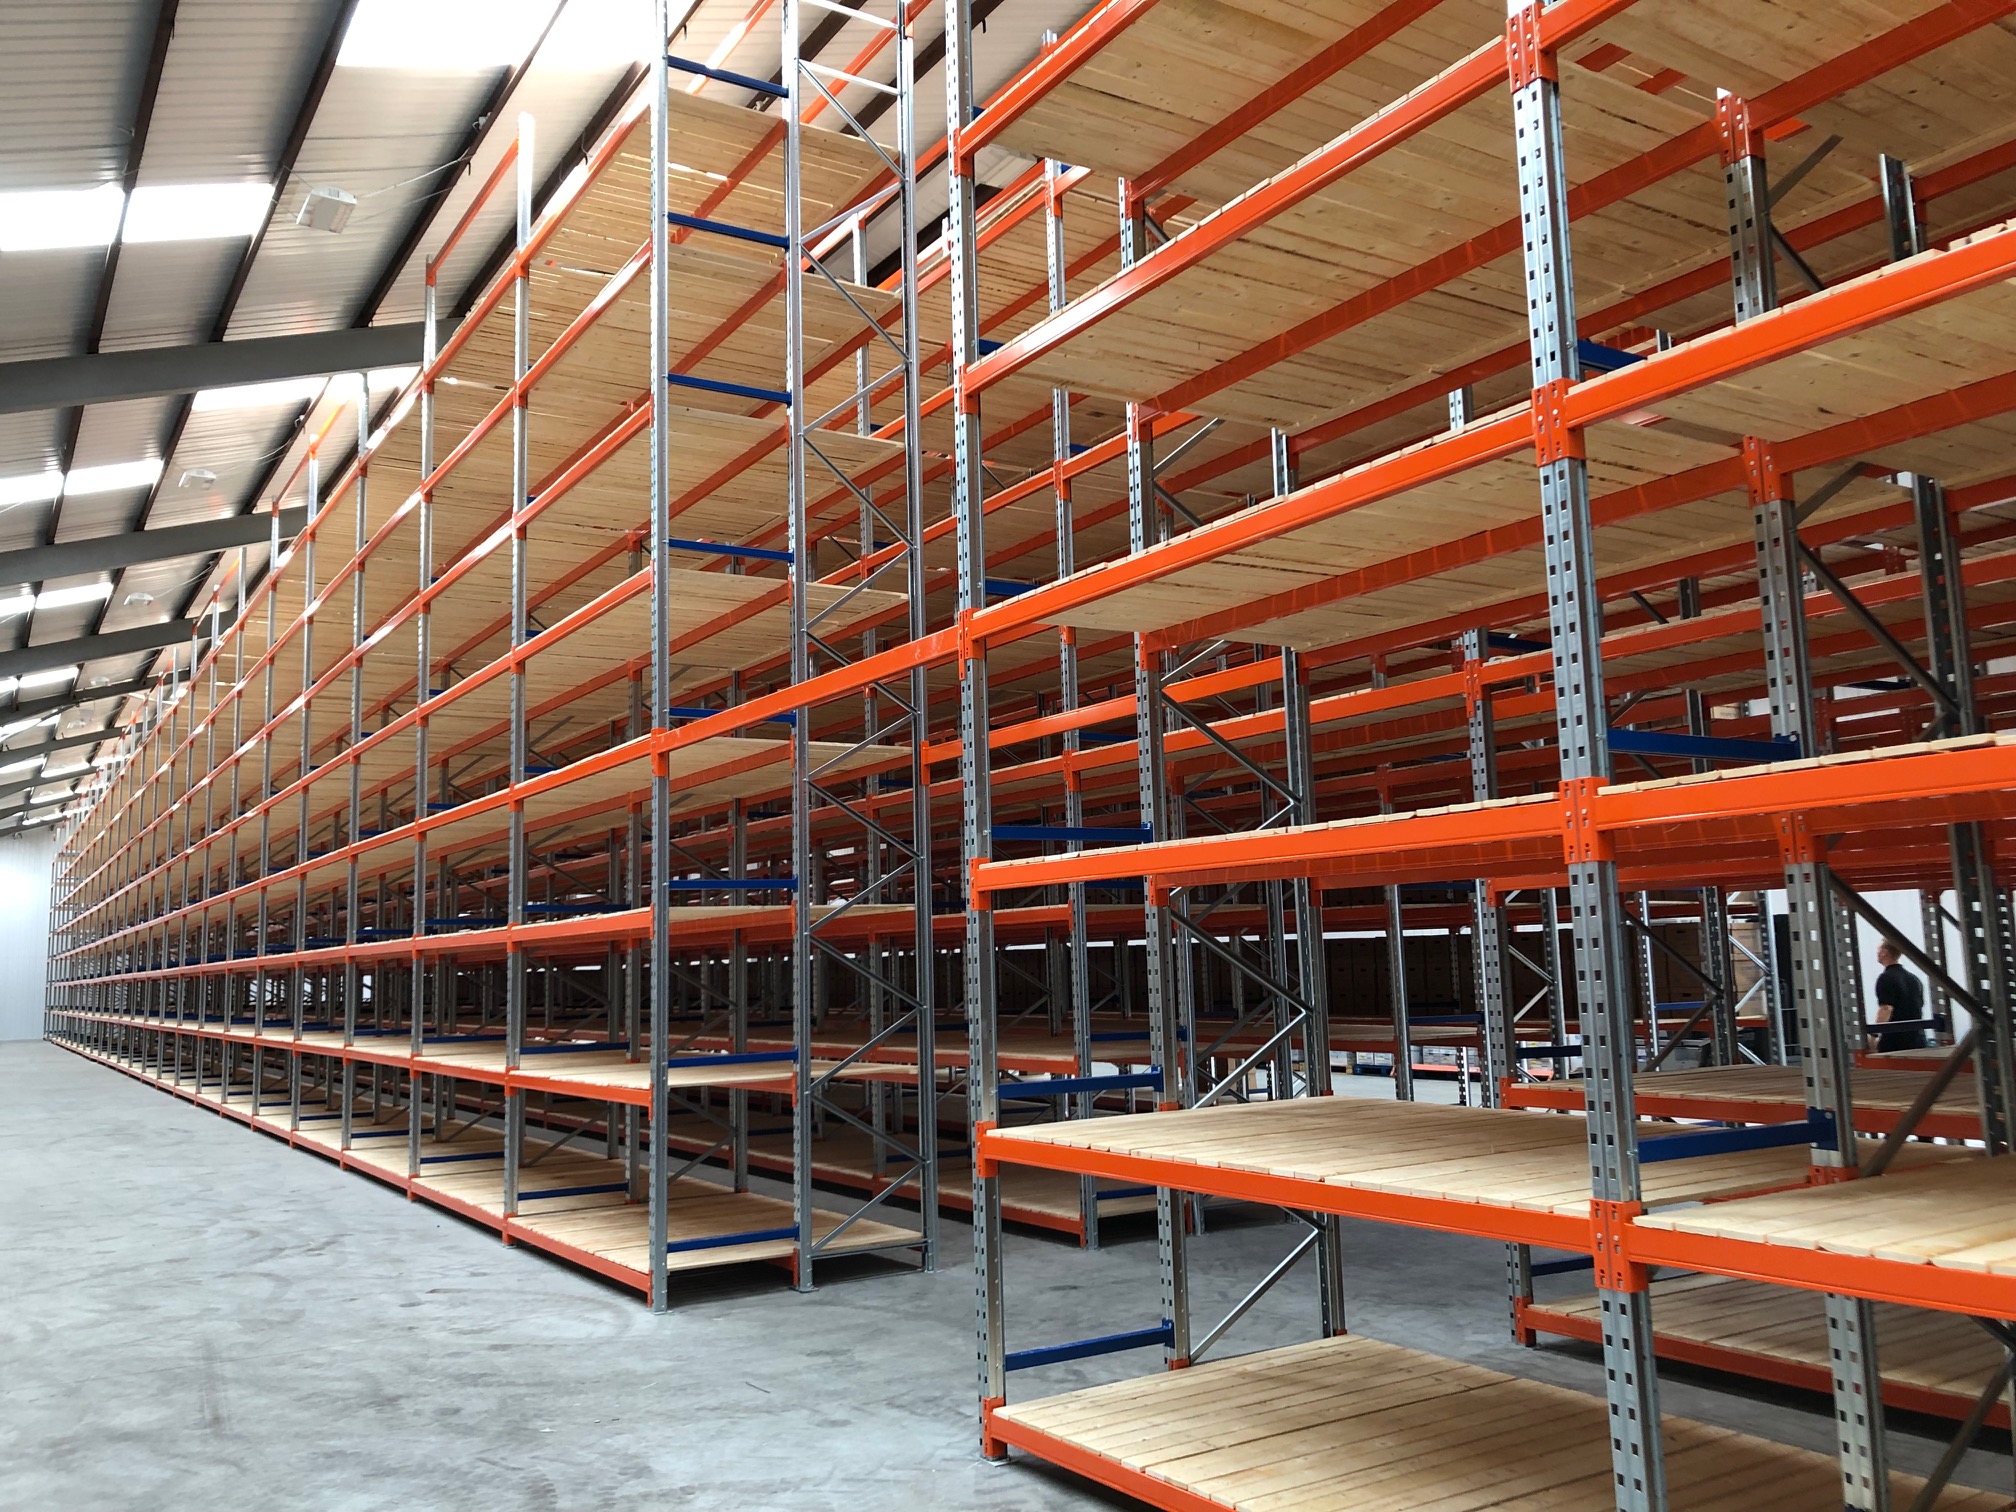 Project Management from Warehouse Storage Solutions